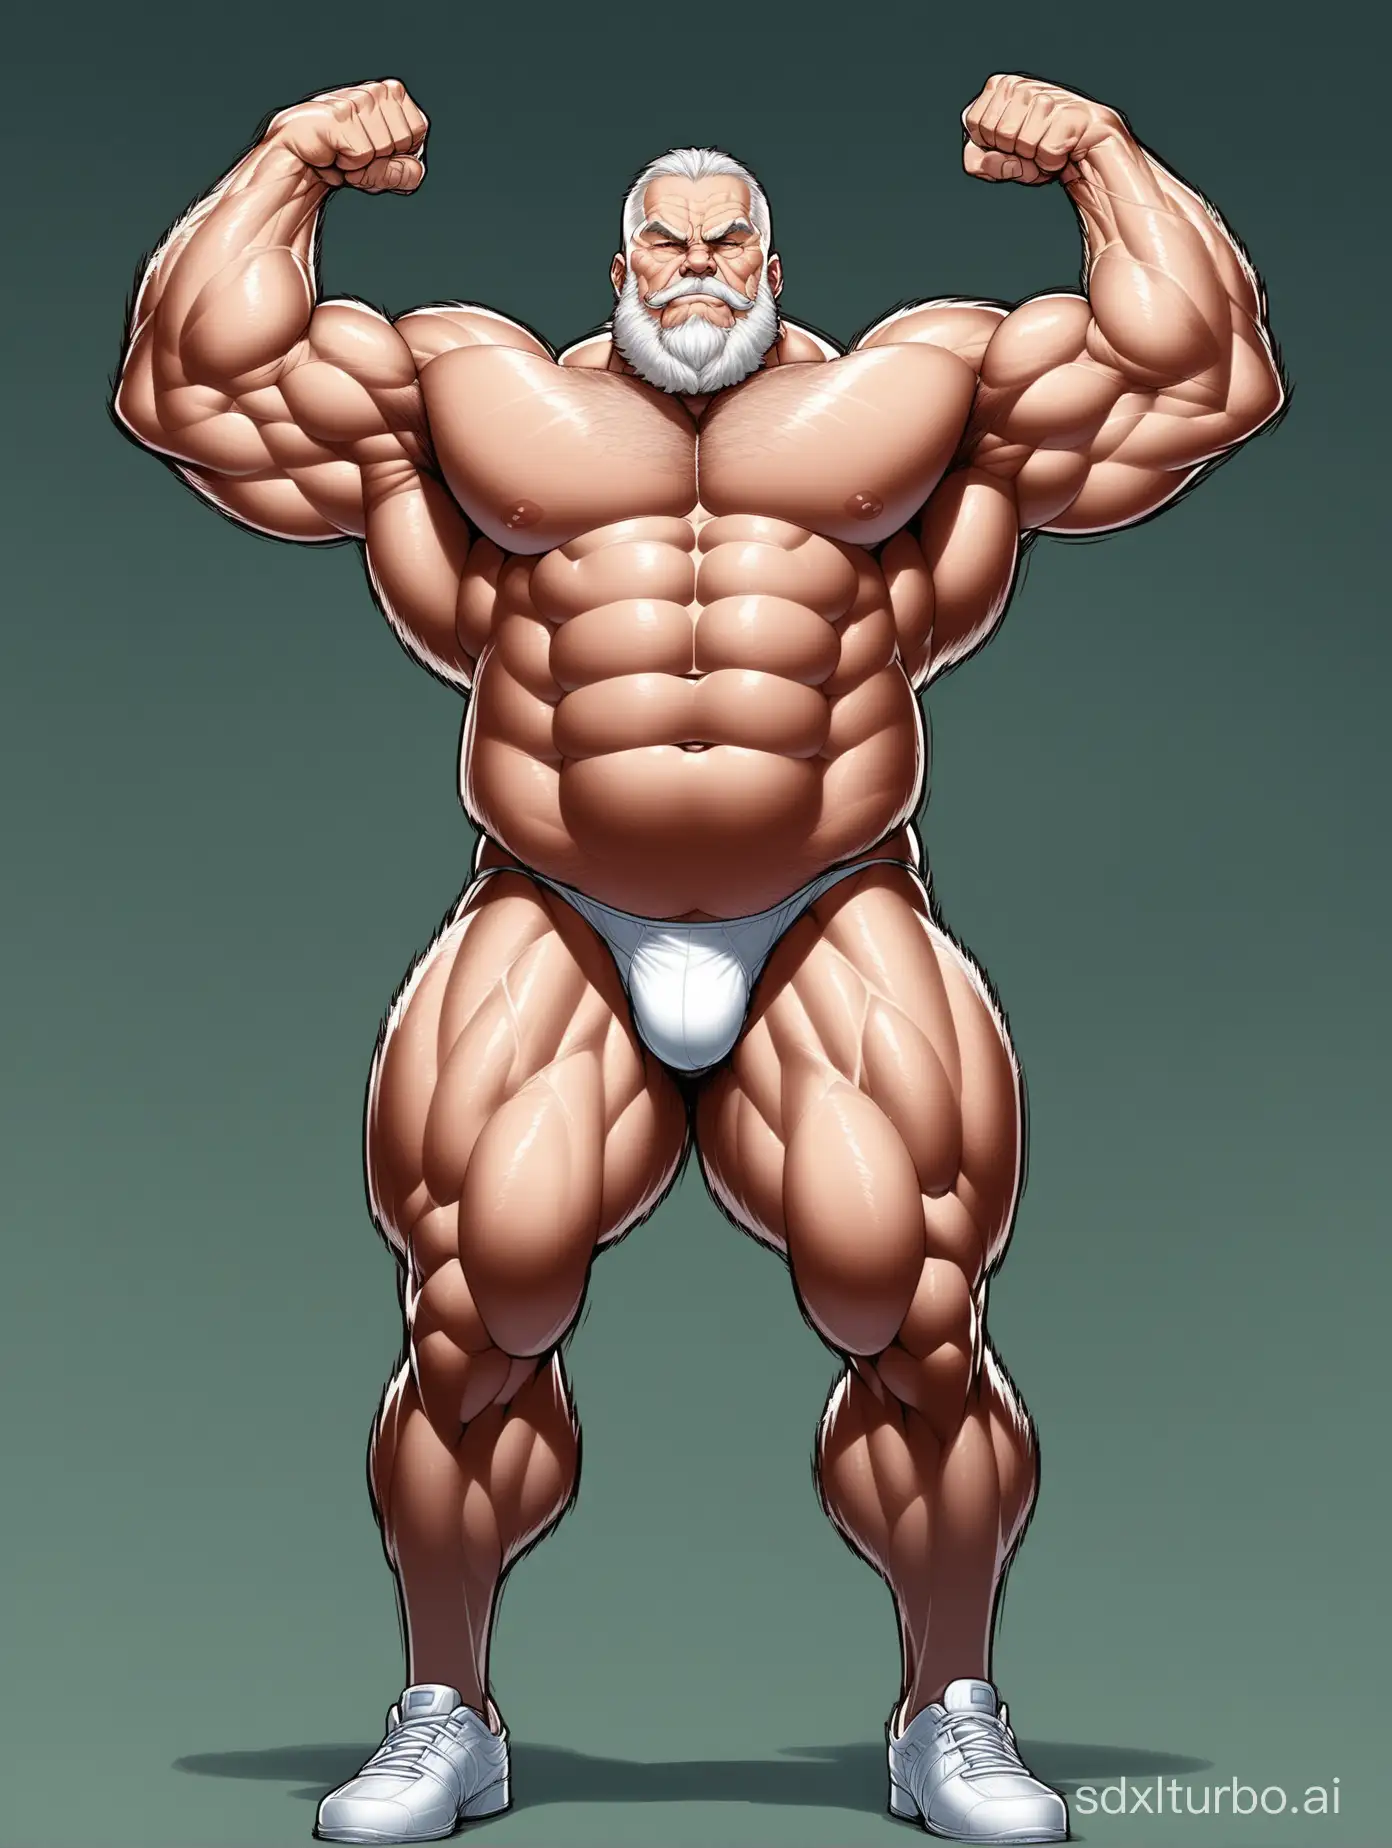 White skin and massive muscle stud, much bodyhair. Huge and giant and Strong body. Very Long and strong legs. 2m tall. very Big Chest. very Big biceps. 8-pack abs. Very Massive muscle Body. Wearing underwear. he is giant tall. very fat. very fat. very fat. Full Body diagram. very long strong legs.very long legs.very long legs. raise his arms to show his huge biceps. wearing white shoes. raise his arms to show his huge biceps.very old man.very old men.White skin and massive muscle stud, much bodyhair. Huge and giant and Strong body. Very Long and strong legs. 2m tall. very Big Chest. very Big biceps. 8-pack abs. Very Massive muscle Body. Wearing underwear. he is giant tall. very fat. very fat. very fat. Full Body diagram. very long strong legs.very long legs.very long legs. raise his arms to show his huge biceps. wearing white shoes. raise his arms to show his huge biceps.very old man.very old men.White skin and massive muscle stud, much bodyhair. Huge and giant and Strong body. Very Long and strong legs. 2m tall. very Big Chest. very Big biceps. 8-pack abs. Very Massive muscle Body. Wearing underwear. he is giant tall. very fat. very fat. very fat. Full Body diagram. very long strong legs.very long legs.very long legs. raise his arms to show his huge biceps. wearing white shoes. raise his arms to show his huge biceps.very old man.very old men.